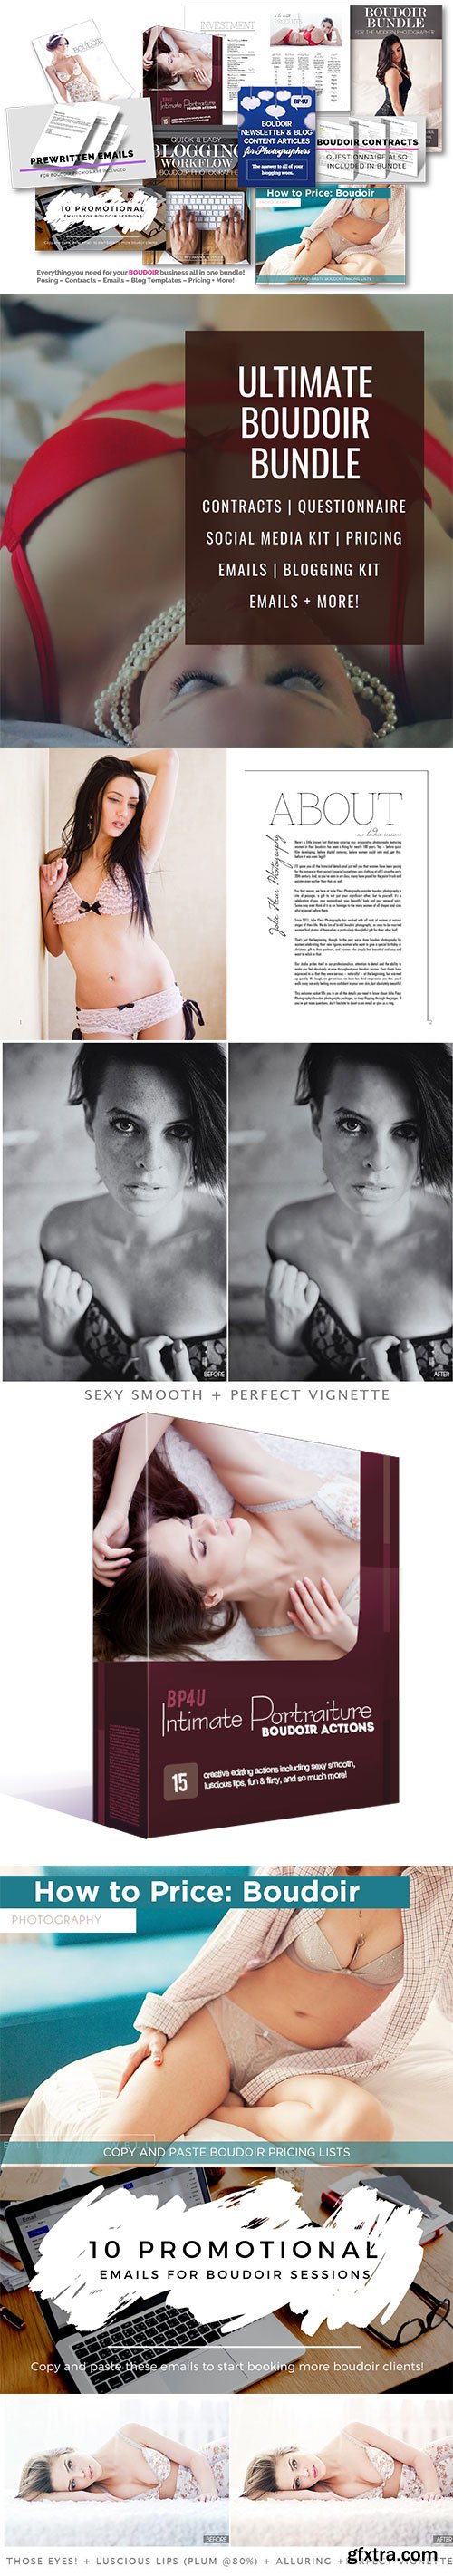 The Complete Boudoir Product Collection - BRAND NEW BUNDLE